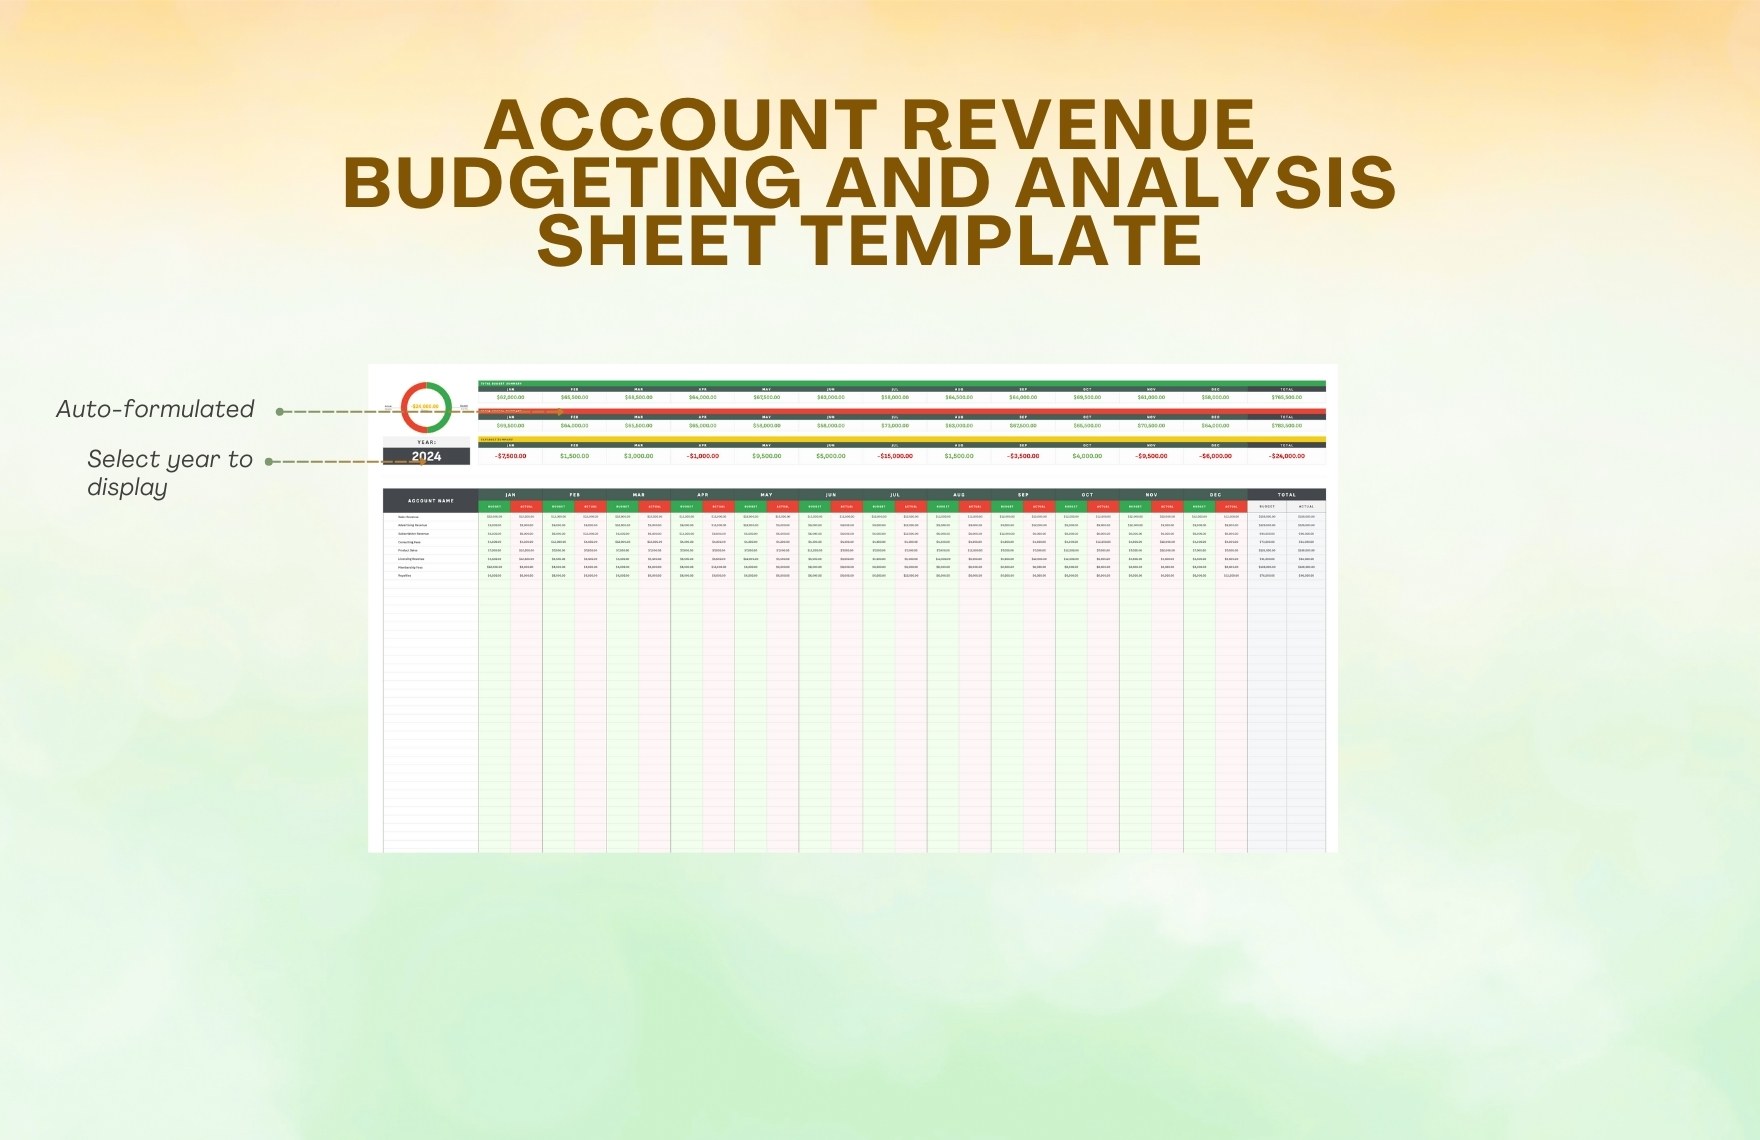 Account Revenue Budgeting and Analysis Sheet Template